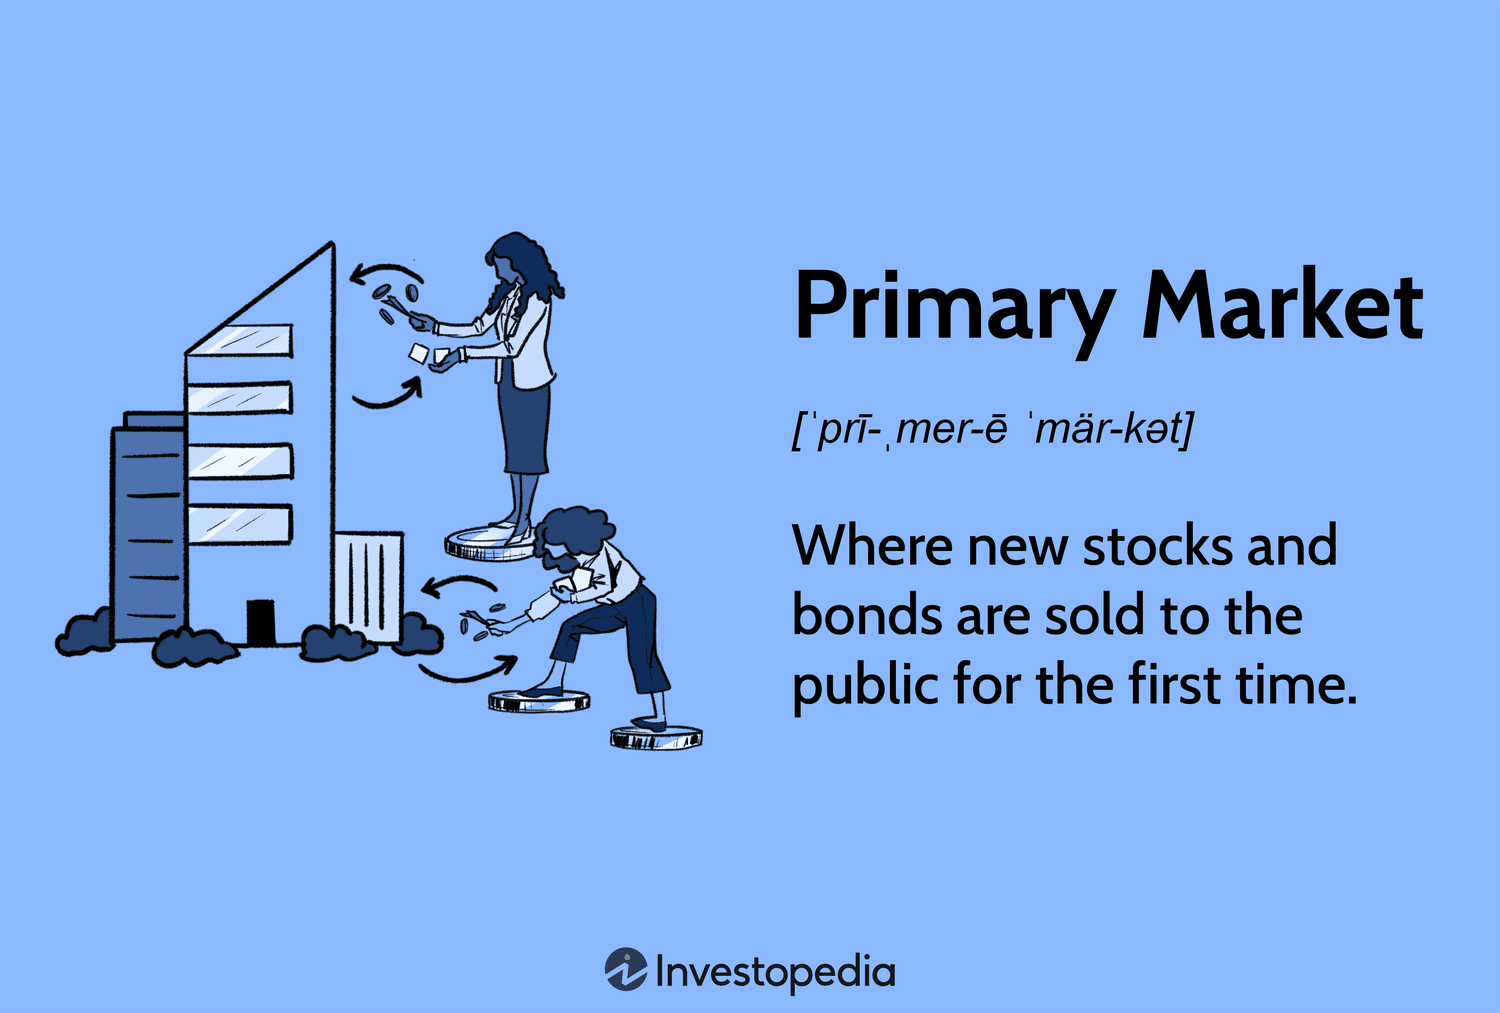 Primary Market - Definition & Meaning